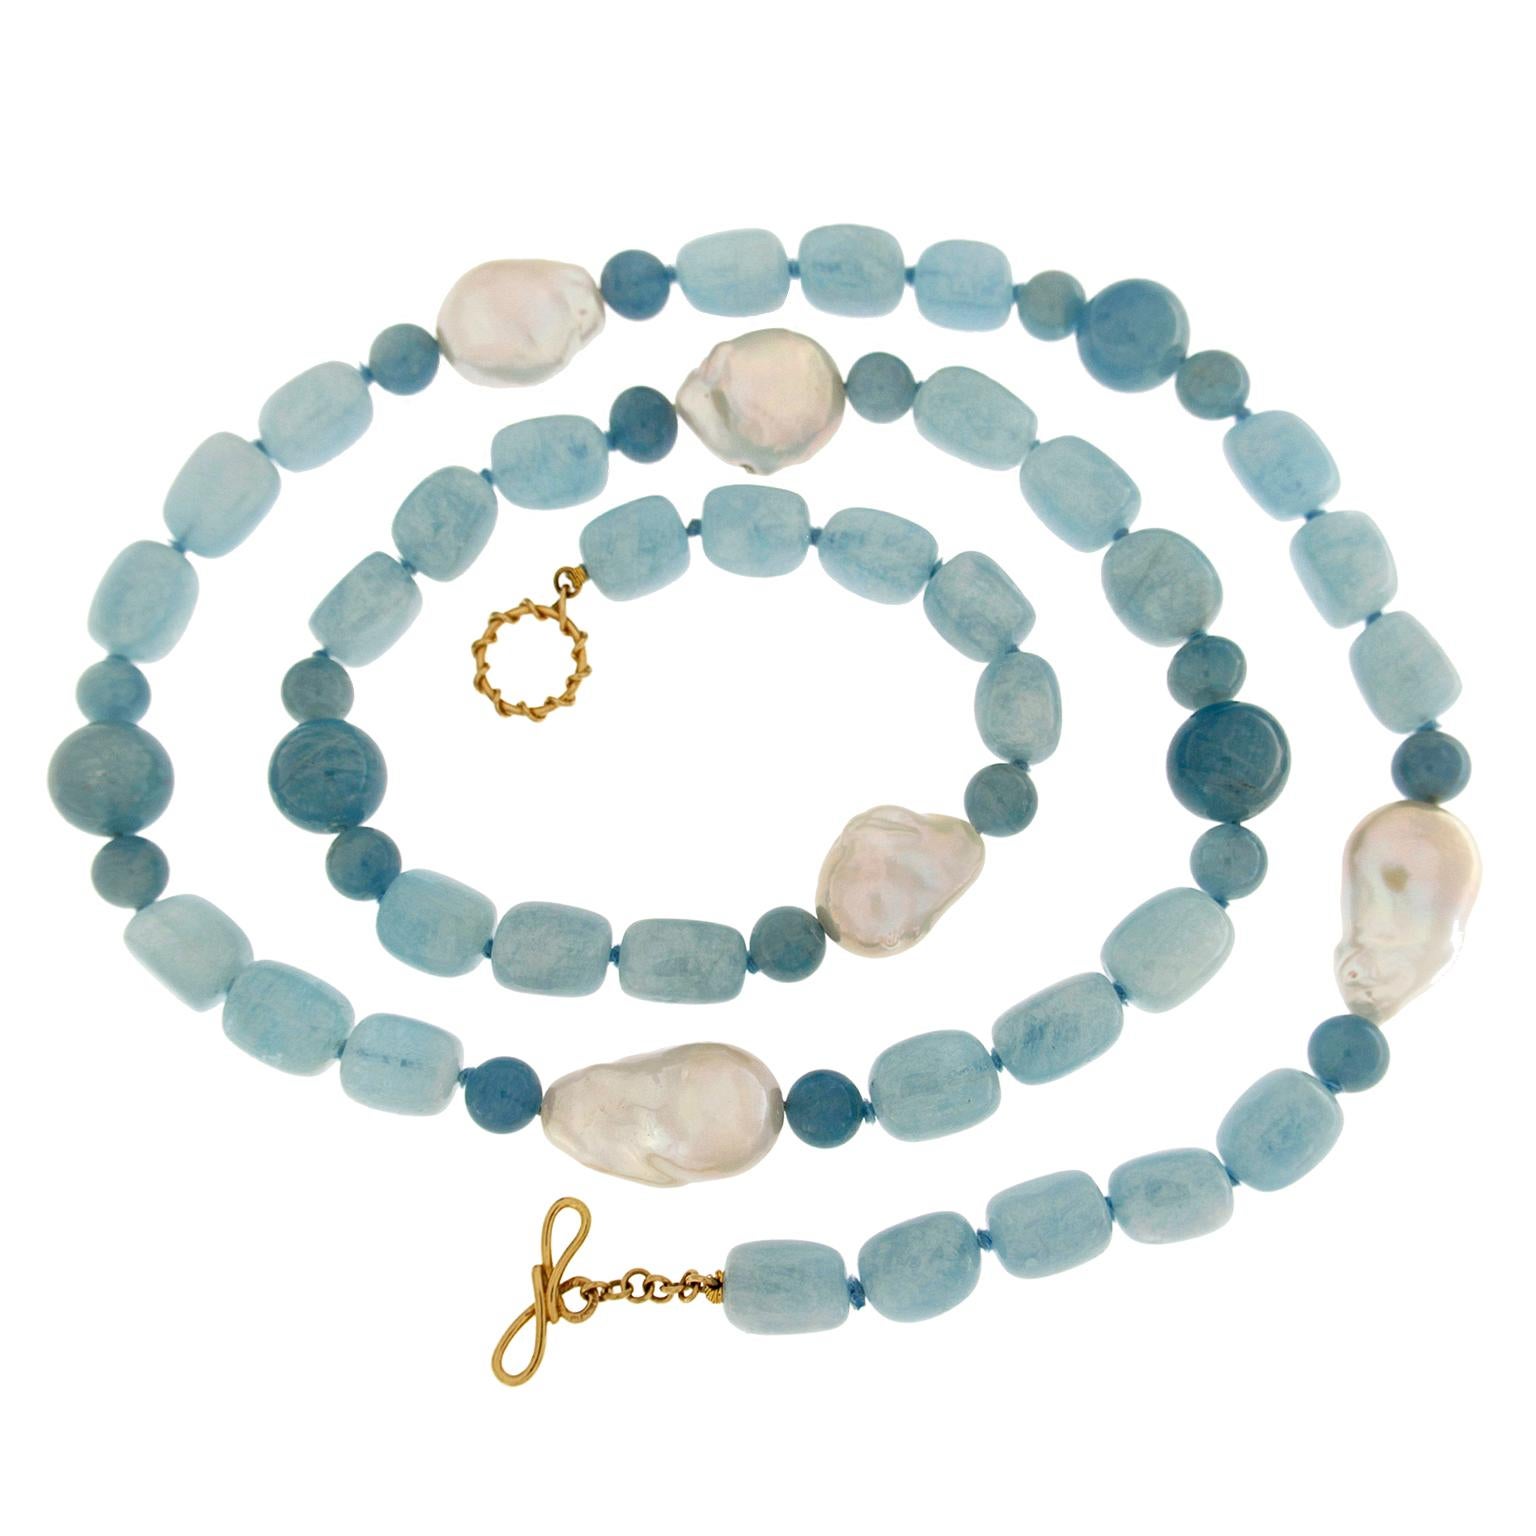 An array of blue displays the varied shades of aquamarine. The pattern begins with five irregularly shaped beads of pale blue. This follows with a baroque white pearl, emitting its satin radiance, in between two roundels of blue-gray. Next, three